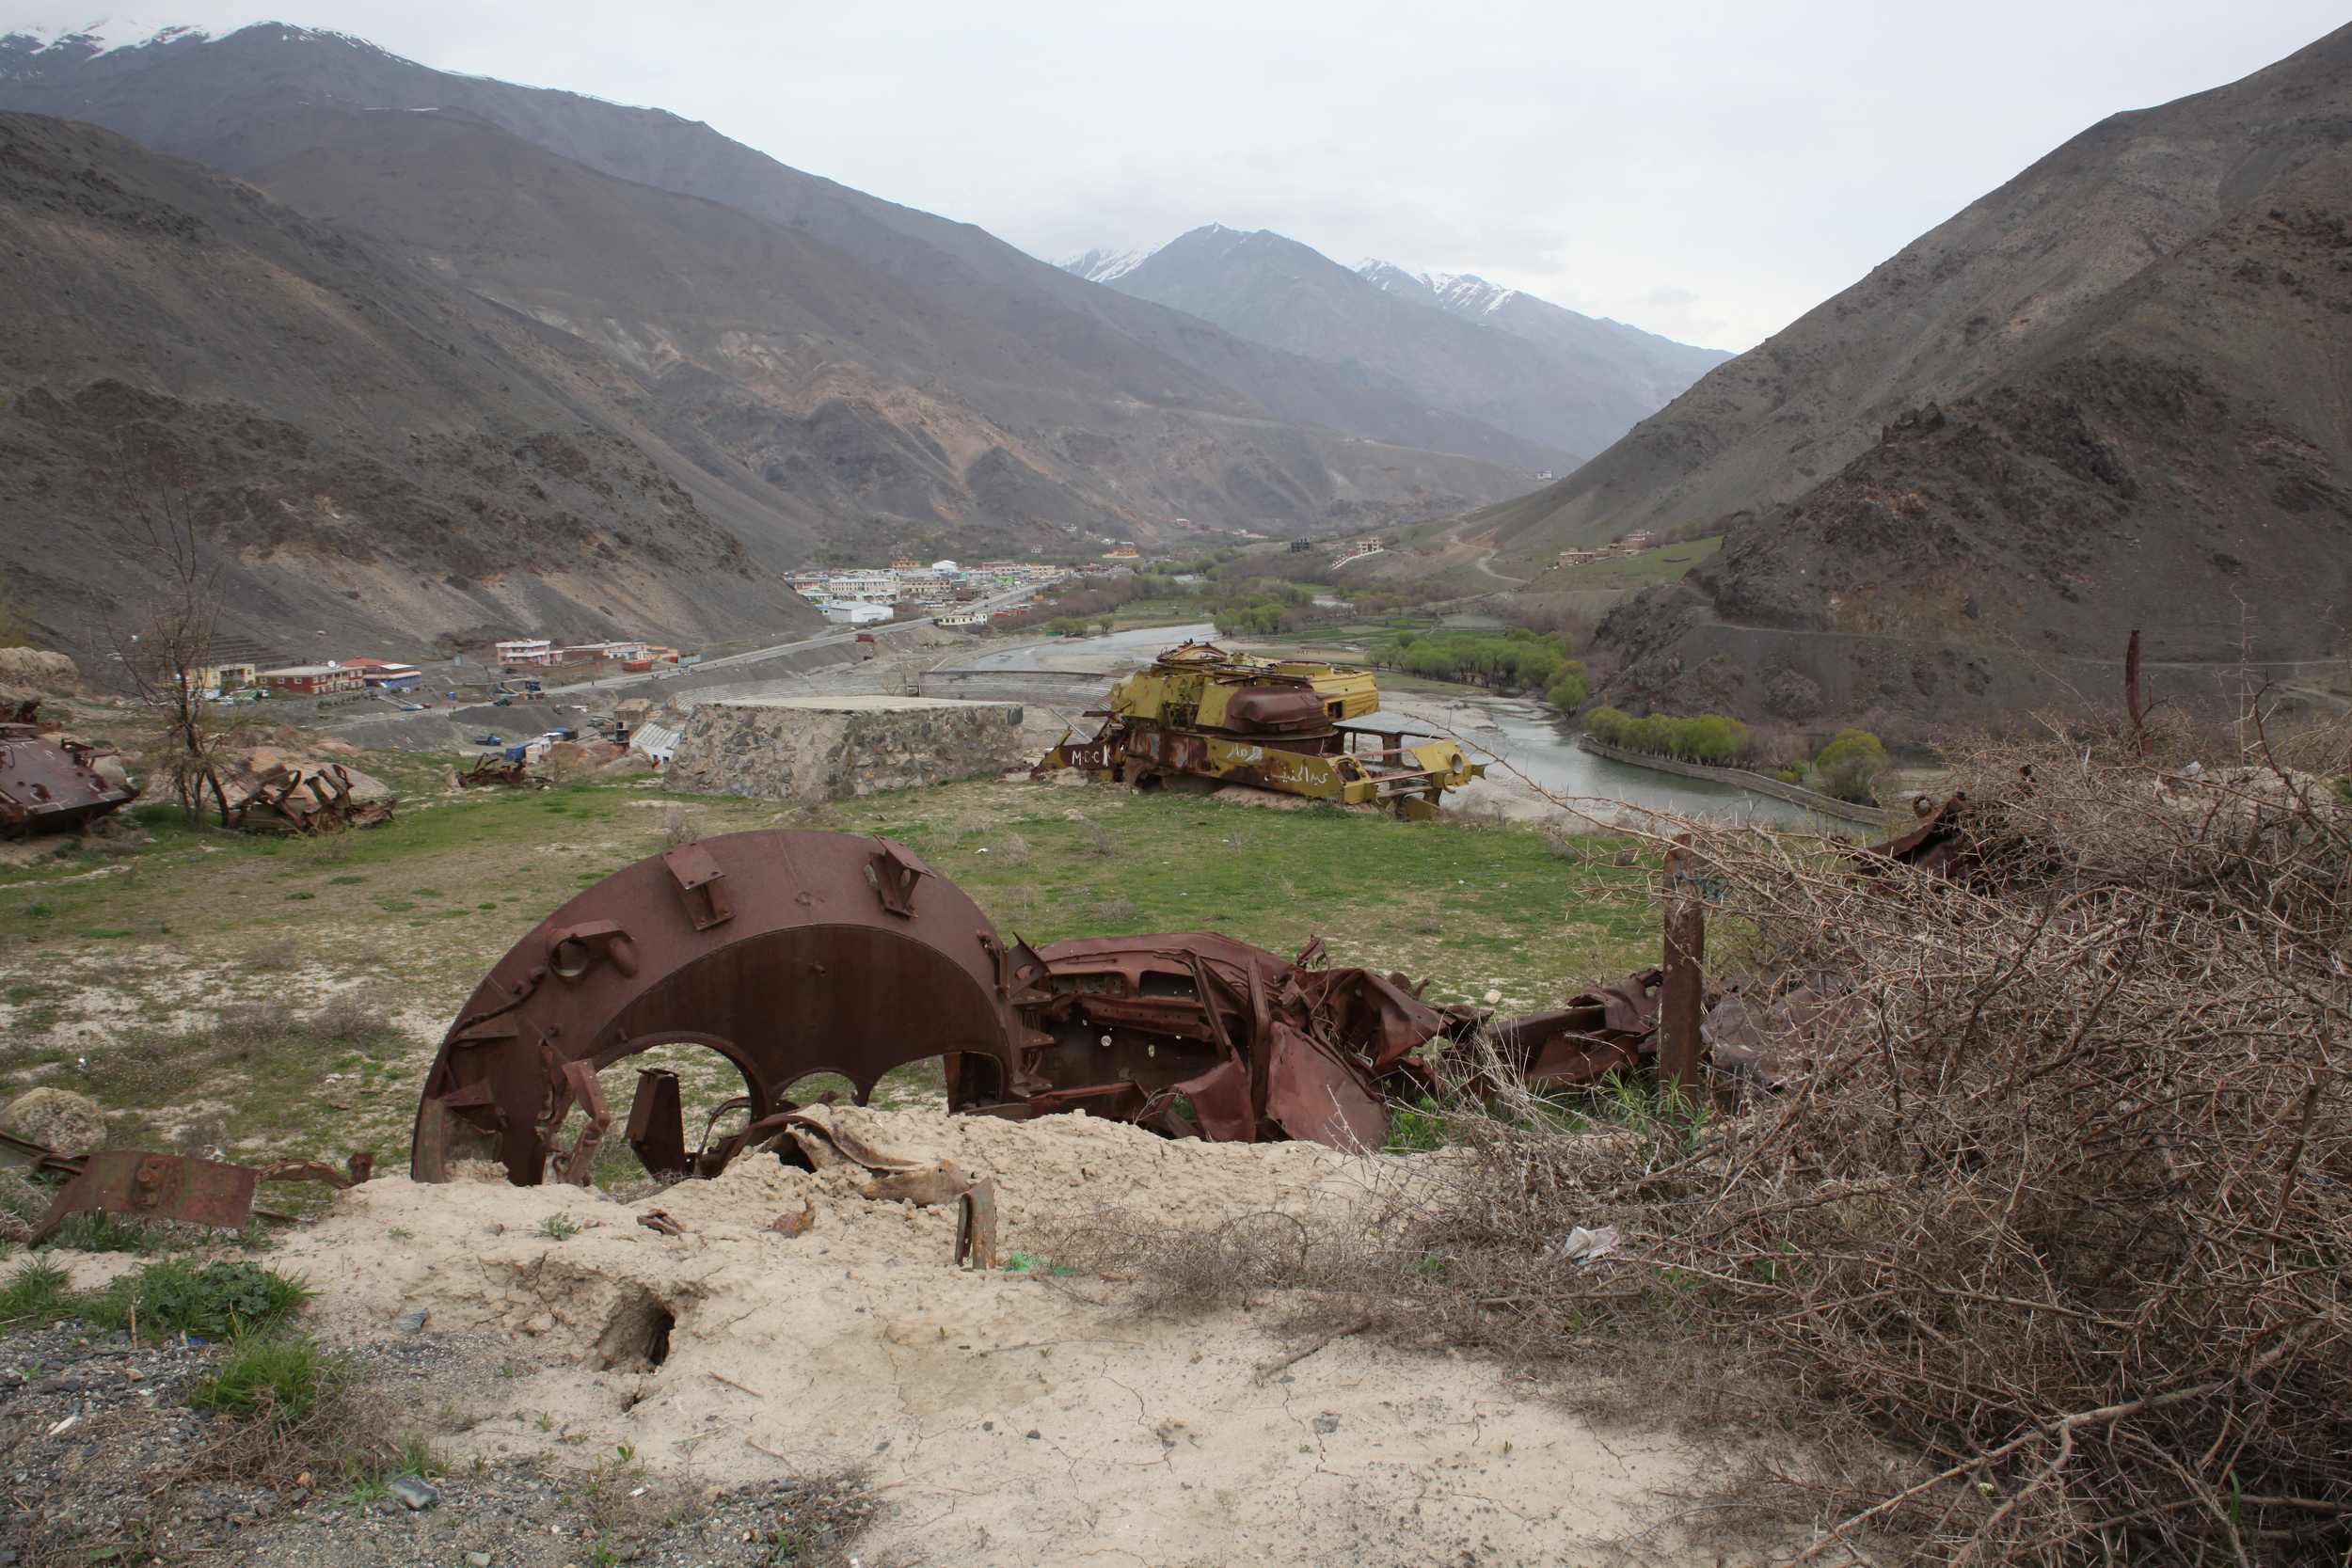   The Panjshir Valley is 150km north of Kabul in Panjshir Provence. The terrain is so rugged that armies from the British to the Soviets suffered heavy casualties when trying to engage various factions and iterations of Afghan fighters. Most recently